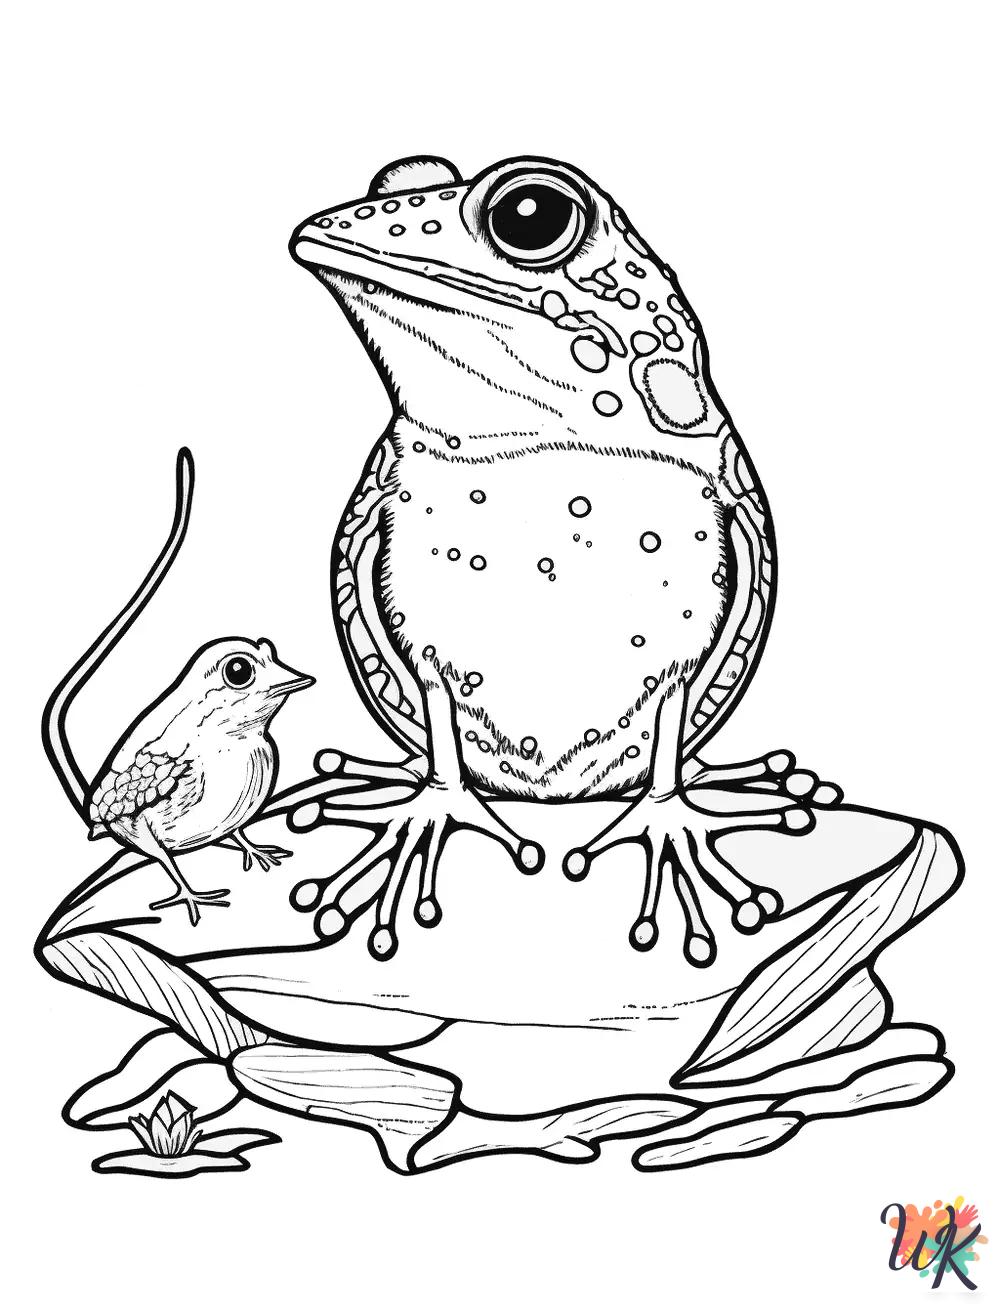 Frog printable coloring pages